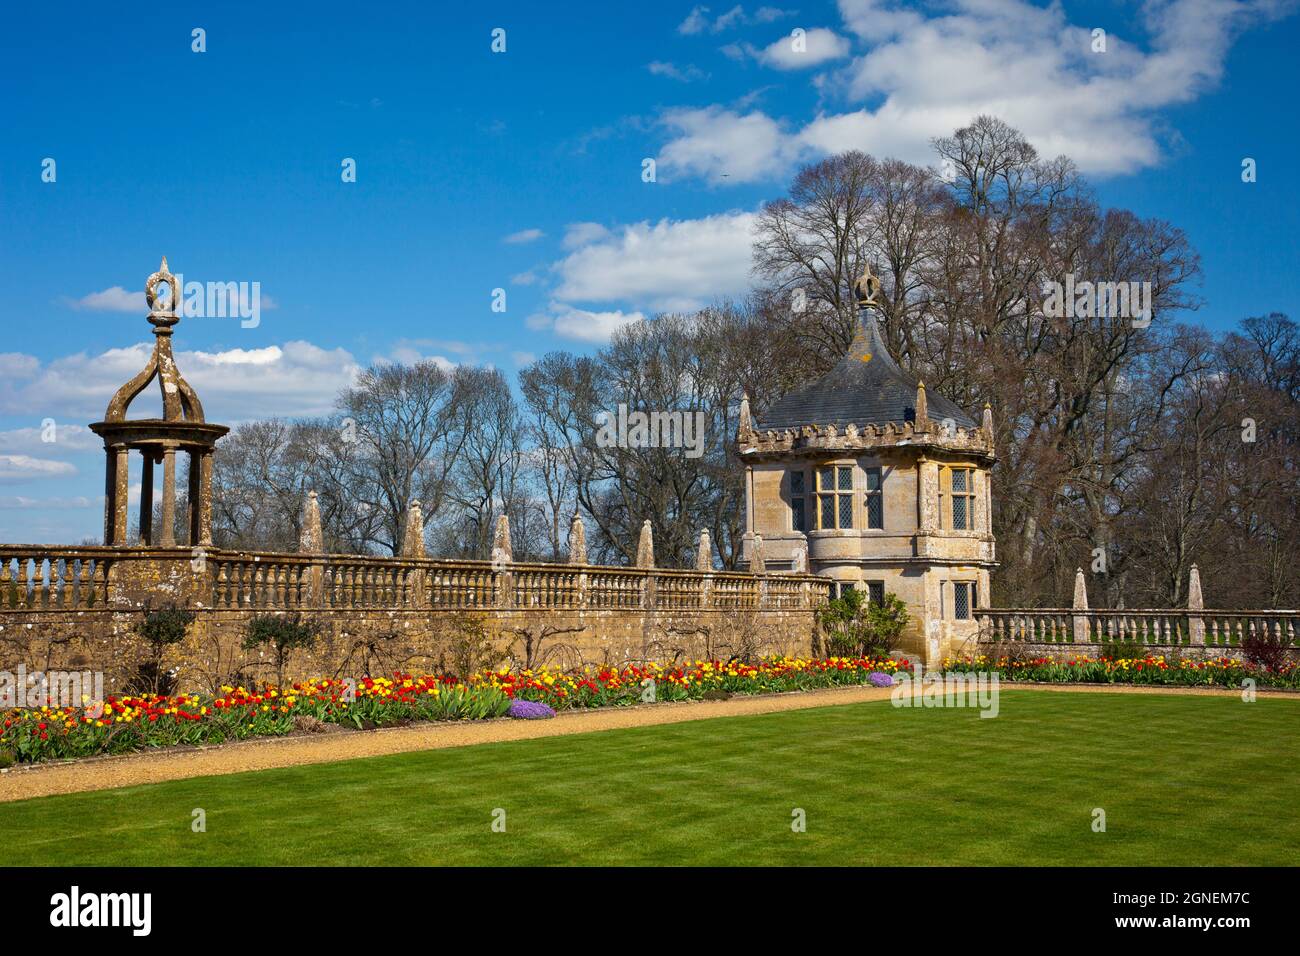 A colourful border of spring tulips and stone gazebo at Montacute House, an Elizabethan mansion with garden near Yeovil, Somerset, England, UK Stock Photo